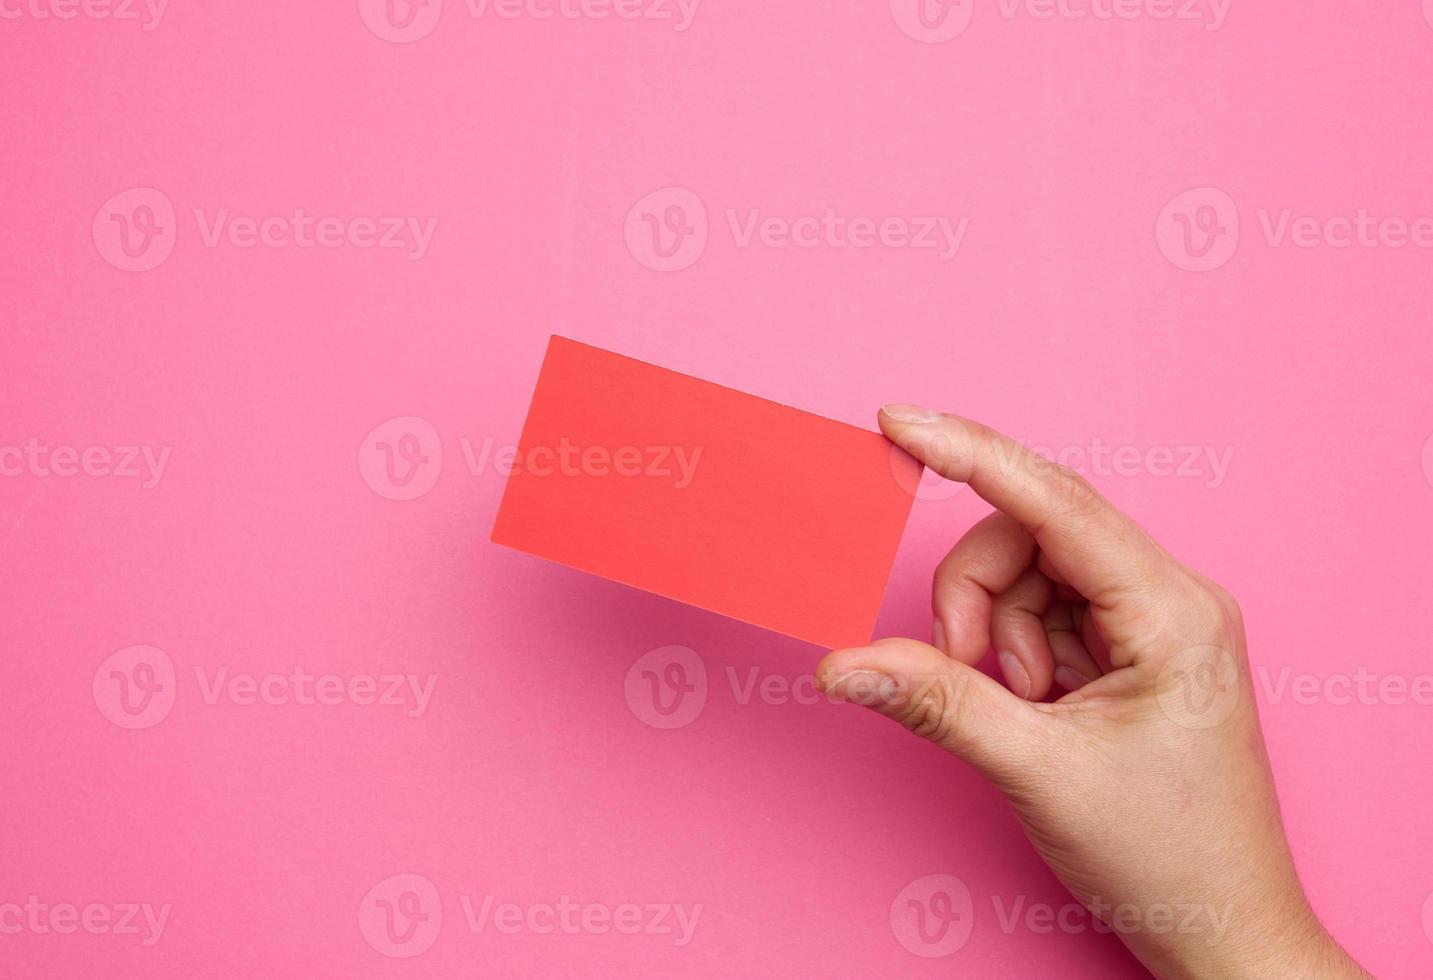 Female hand holding empty  red paper on a pink background. Copy paste image or text photo